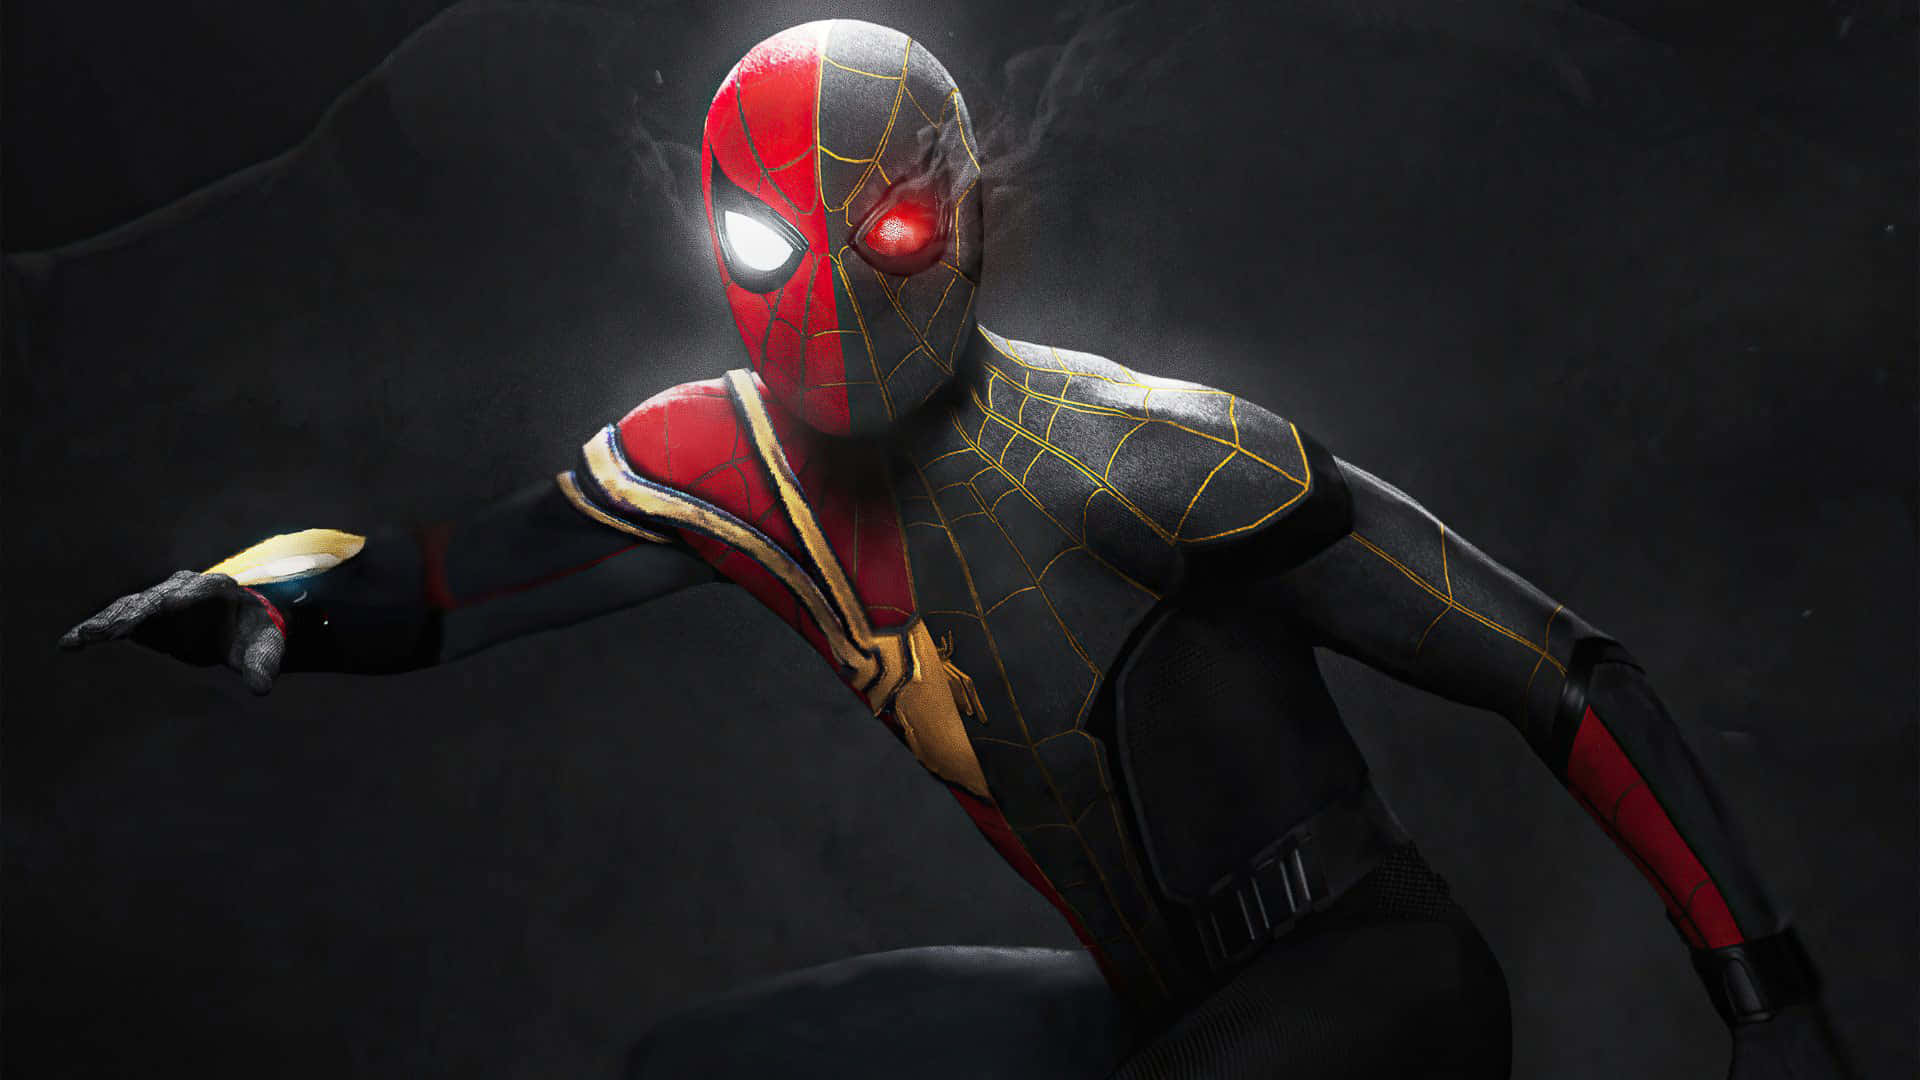 Spider Man In The Dark With His Red And Yellow Costume